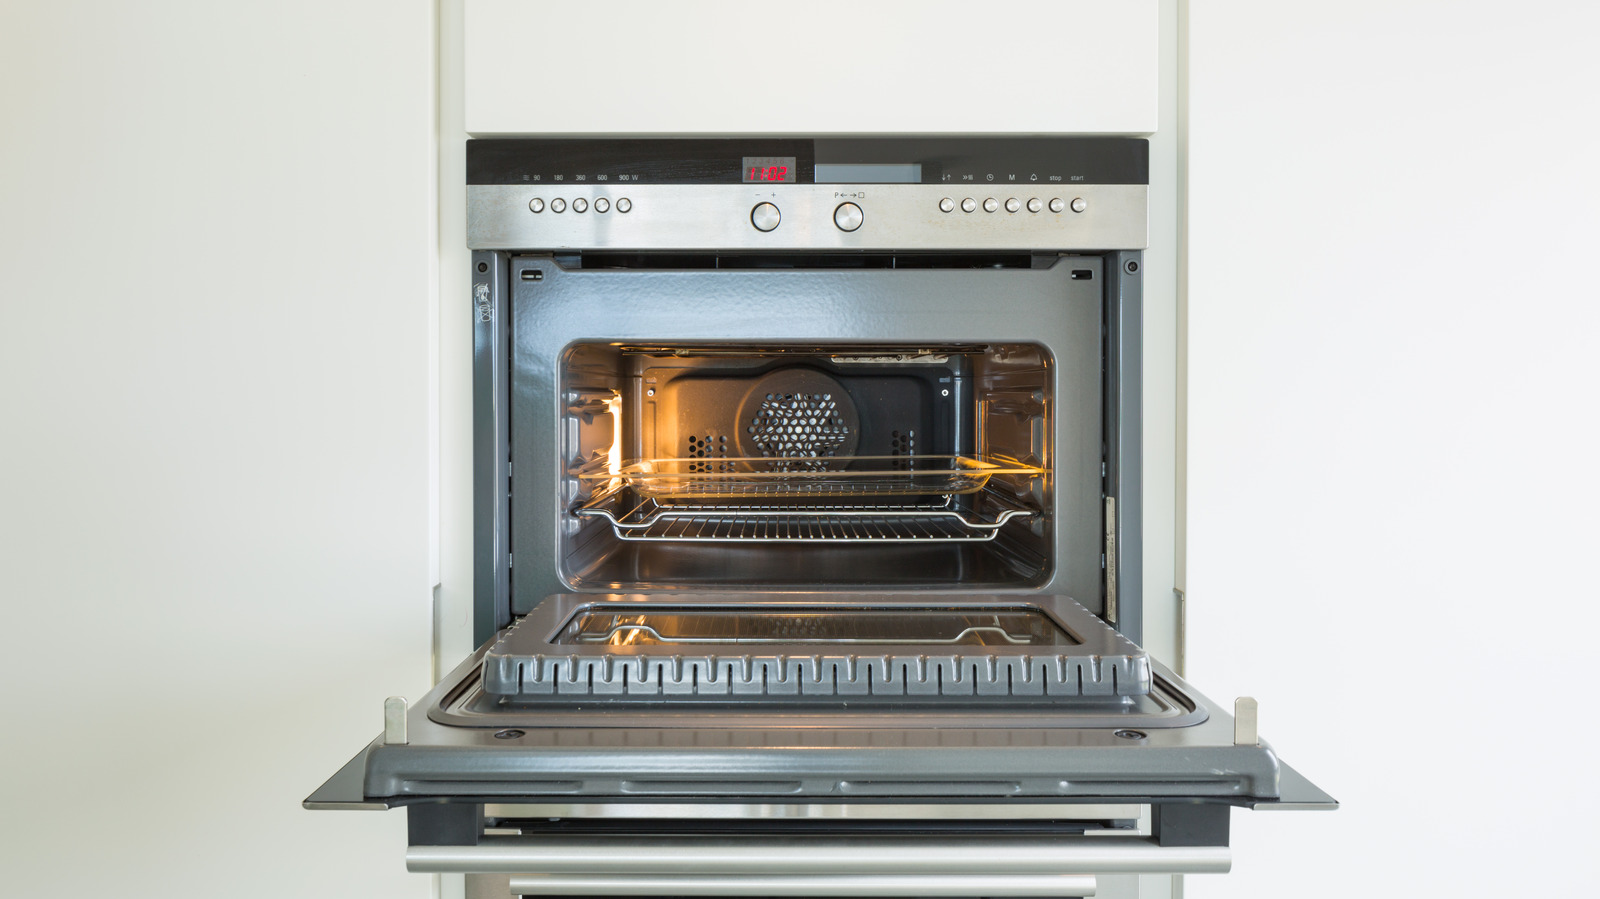 Your Convection Oven Cooking Questions Answered